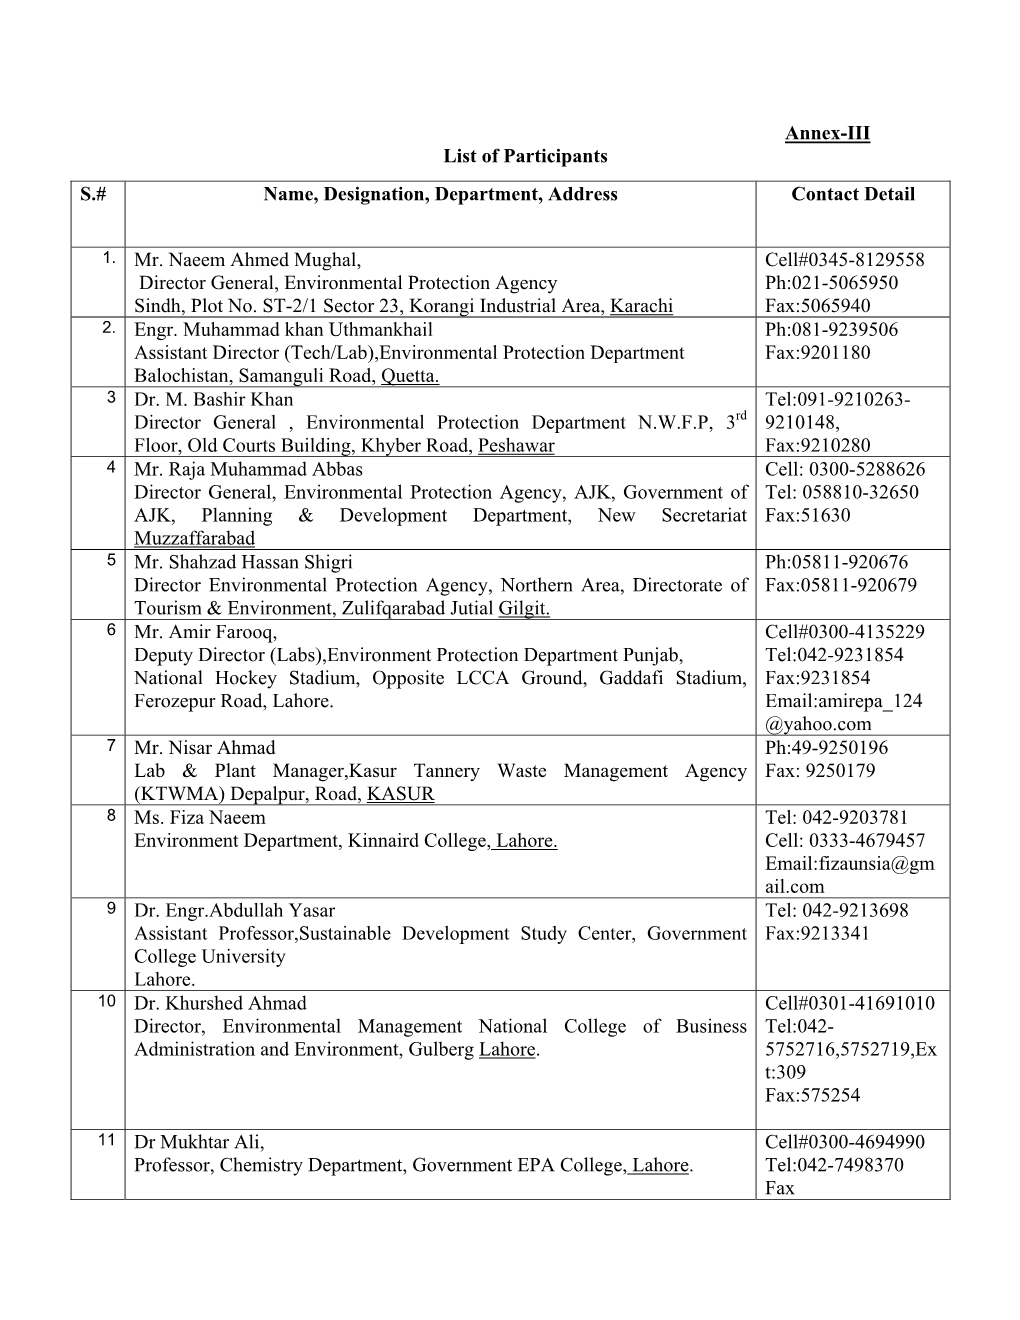 Annex-III List of Participants S.# Name, Designation, Department, Address Contact Detail 1. Mr. Naeem Ahmed Mughal, Director